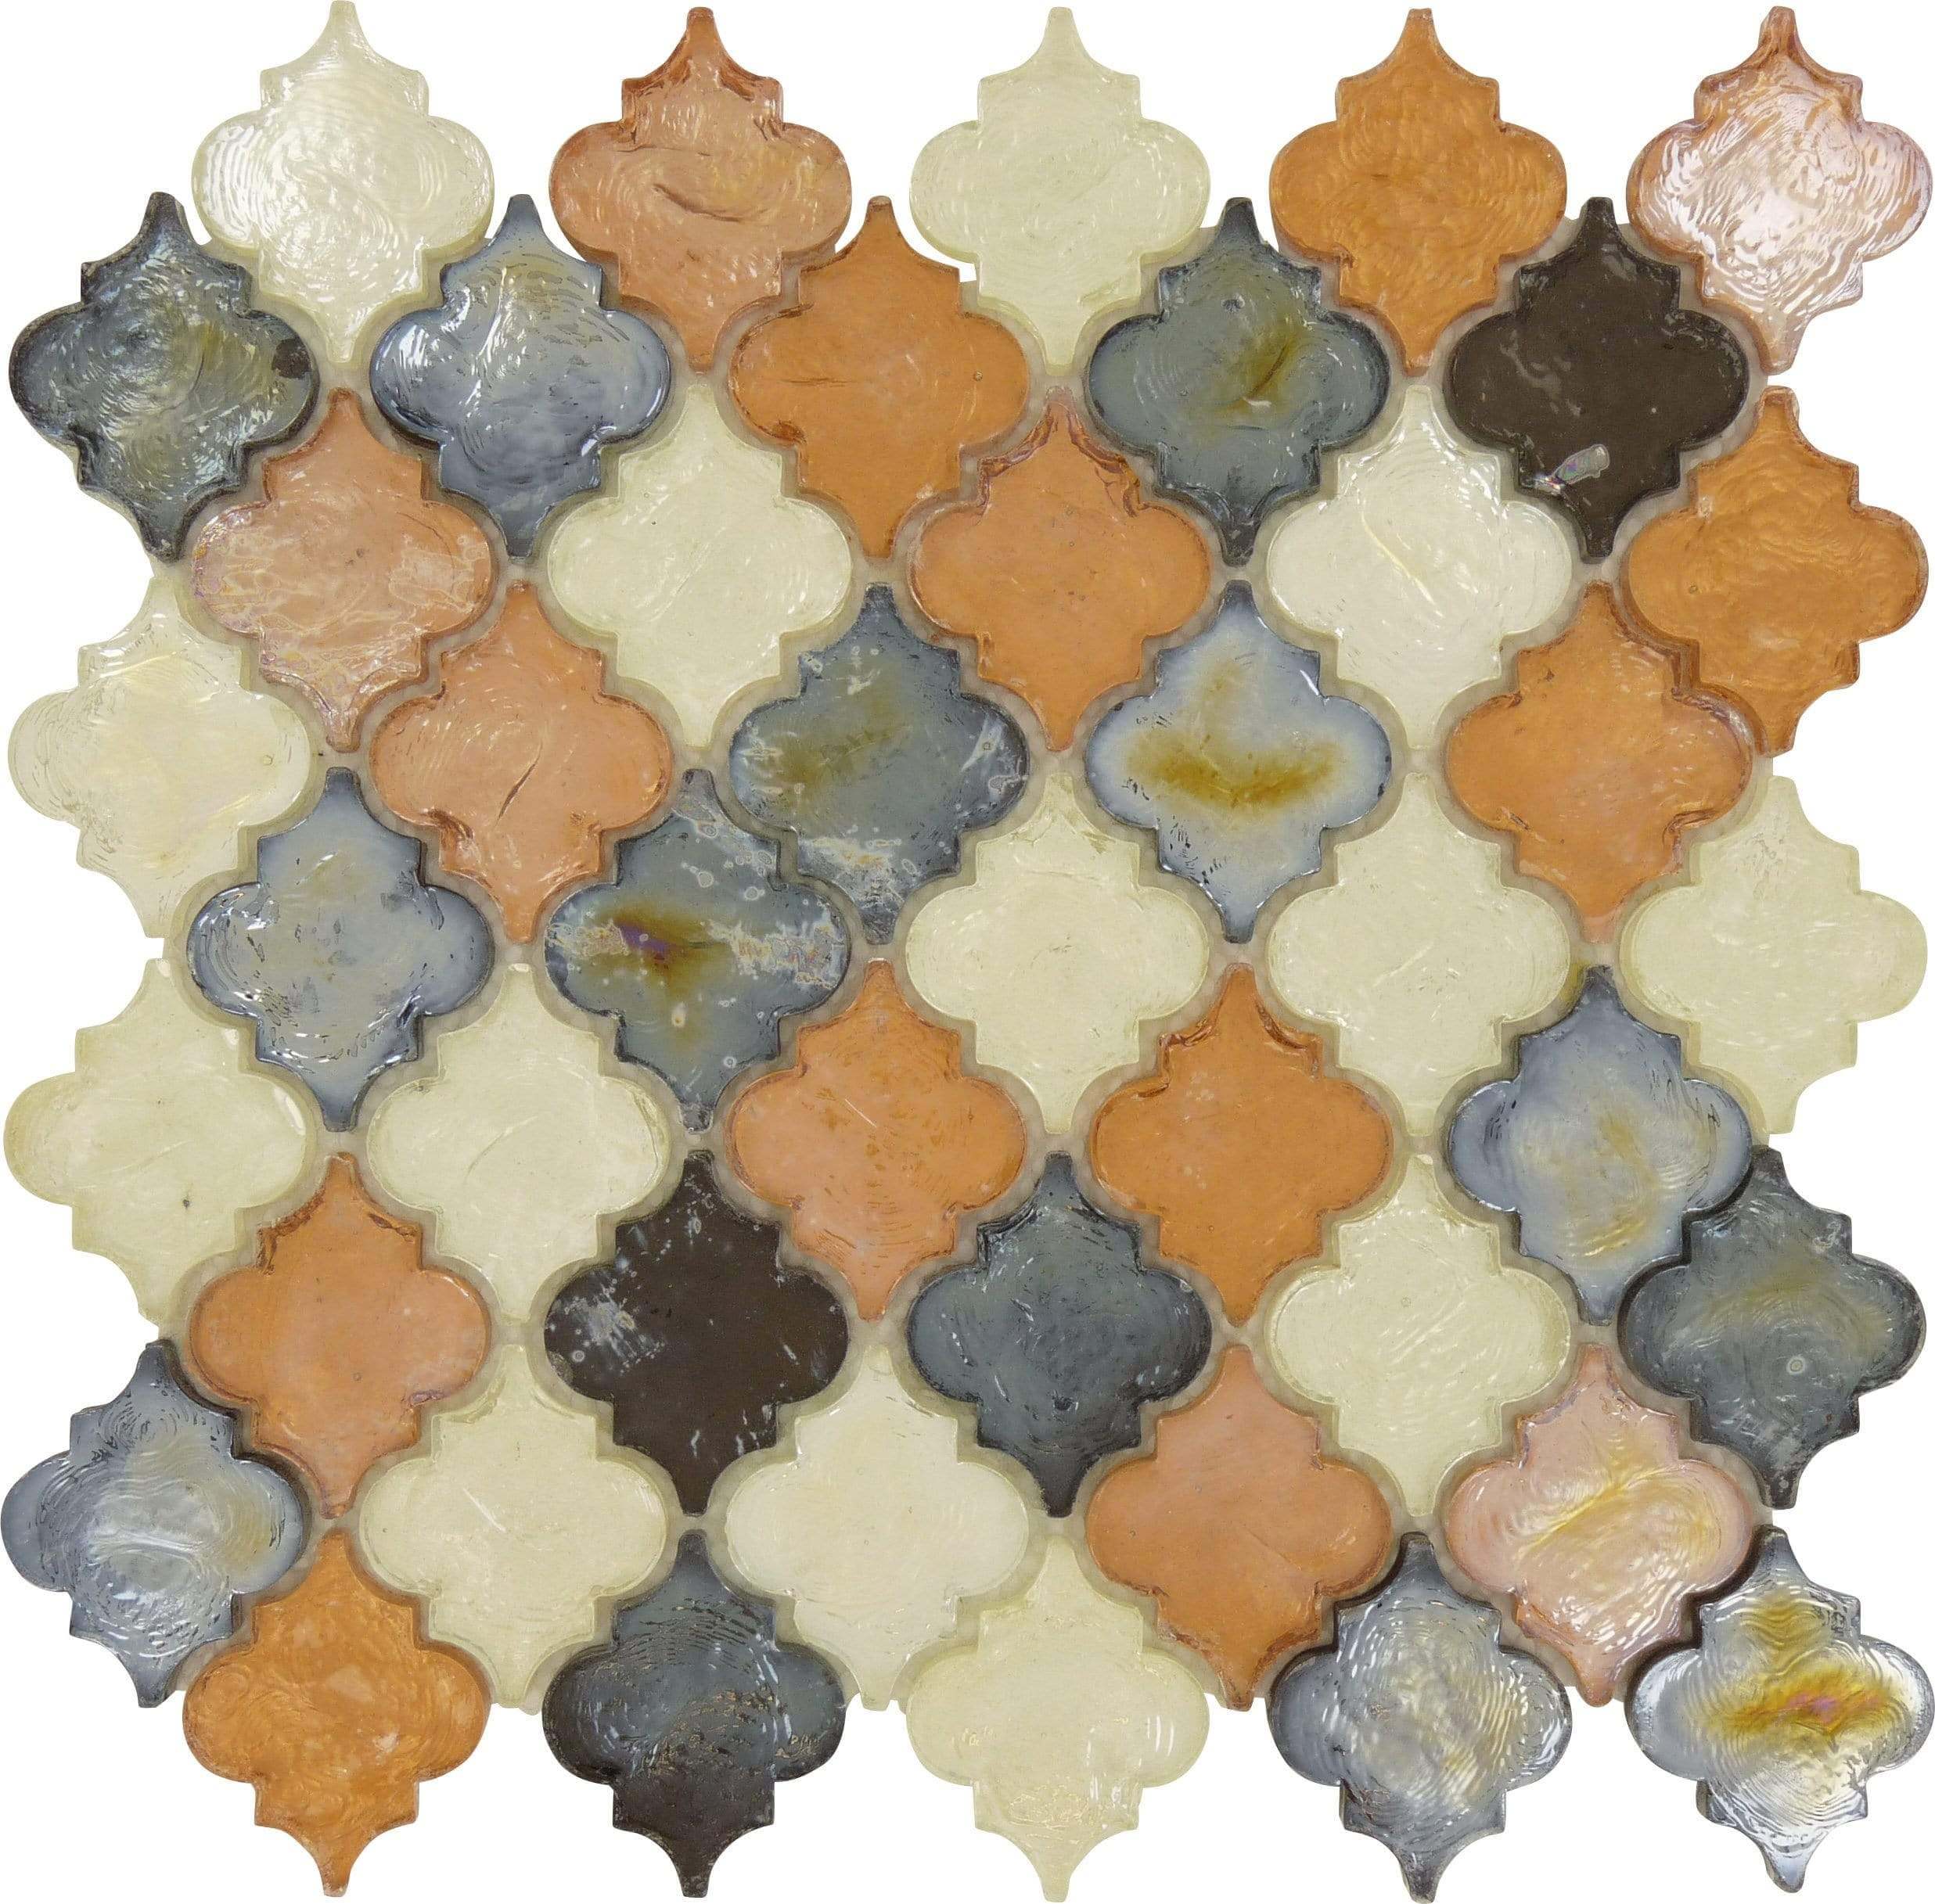 Beautiful Arabesque Tiles Are Available Now At Oasis Tile